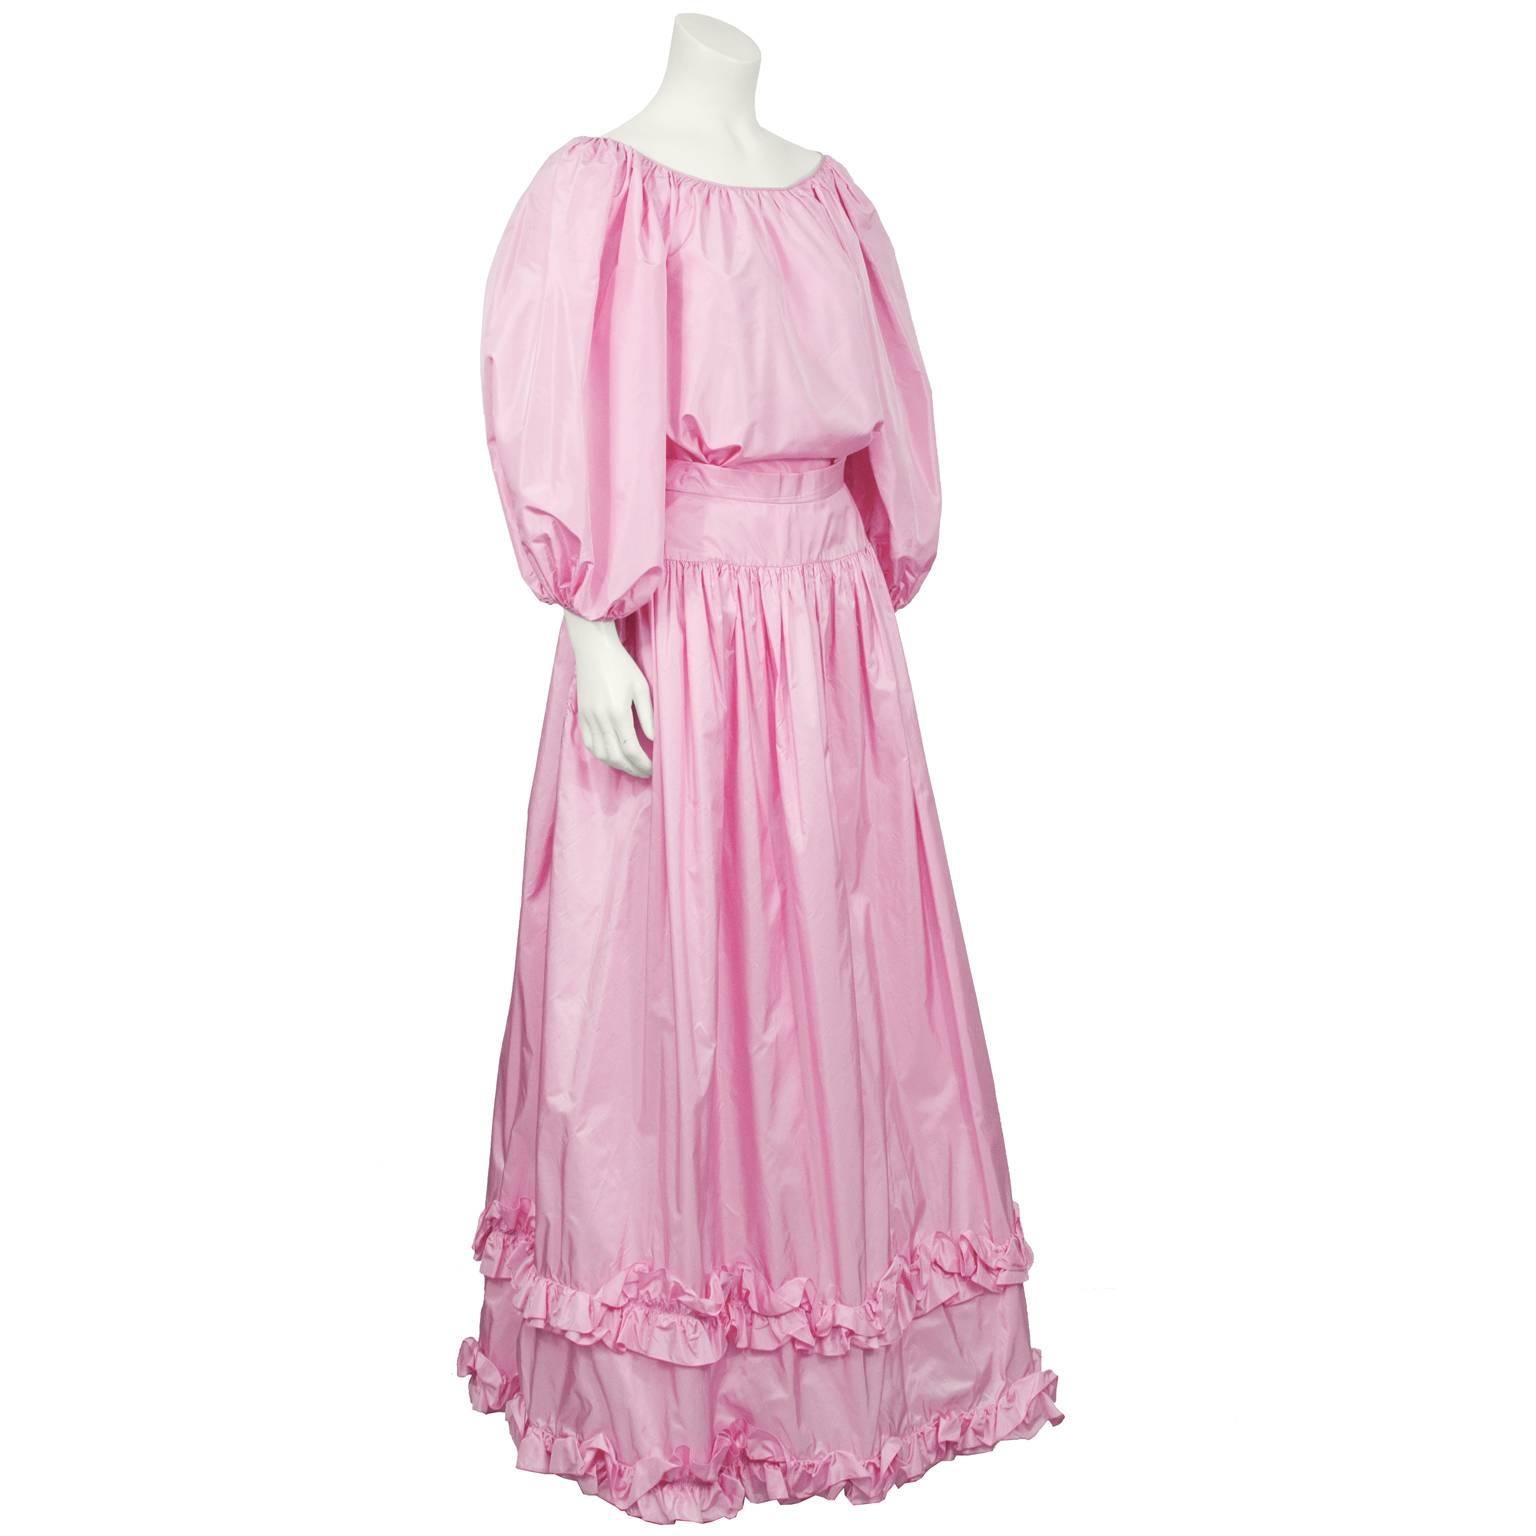 Bubblegum pink silk taffeta ballgown skirt and peasant top ensemble credited to Oscar de la Renta. The top has a wide neckline with keyhole tie and full sleeves. Meant to be worn tucked in and slightly bloused. Skirt has fitted waistband, worn at